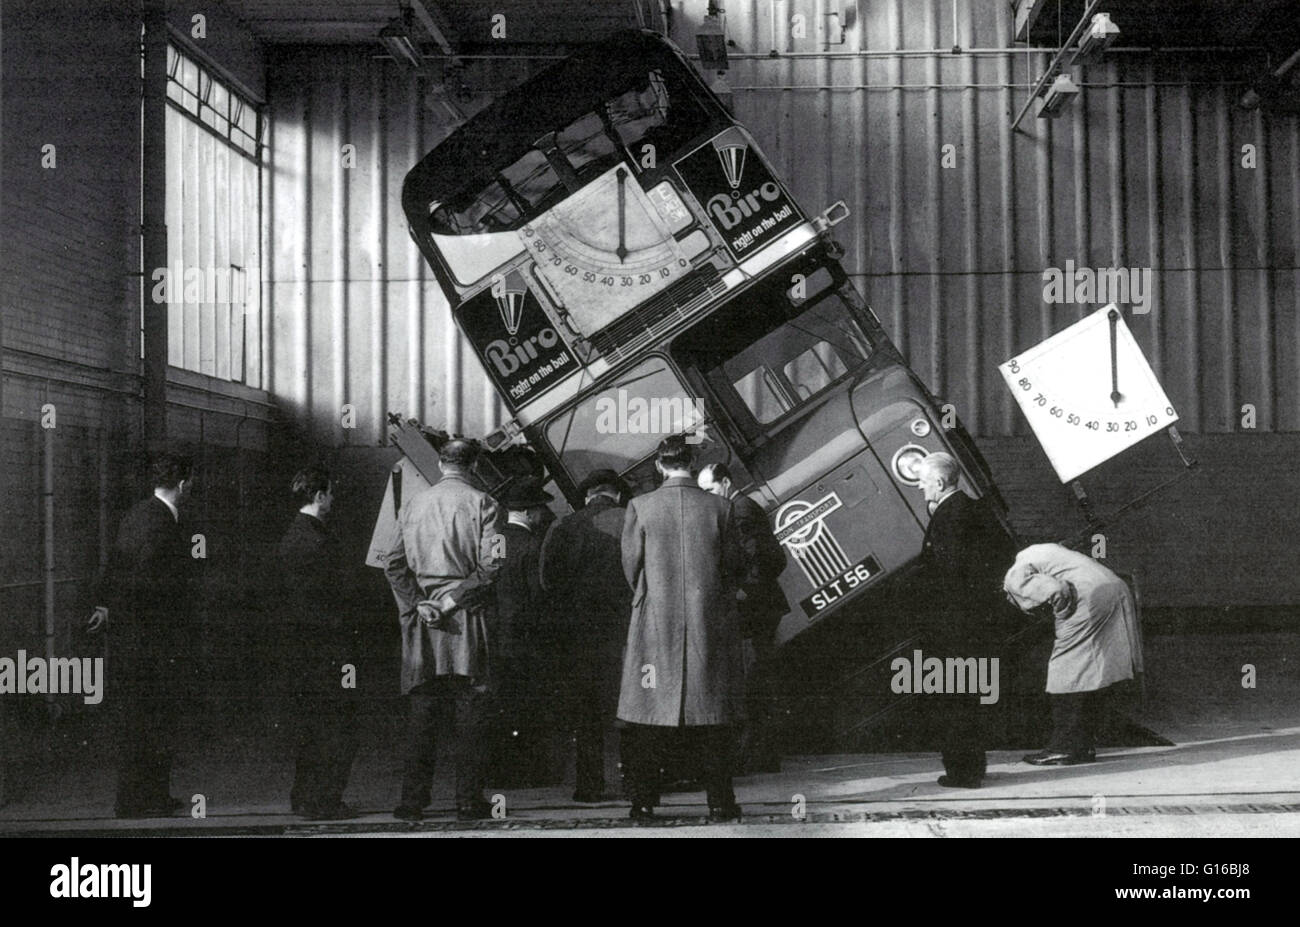 Proof that the Route Master, the last and greatest bus specially designed for conditions in London, was incredibly stable, even at an angle of over 30 degrees from the vertical. No date, photographer or agency credited. Stock Photo